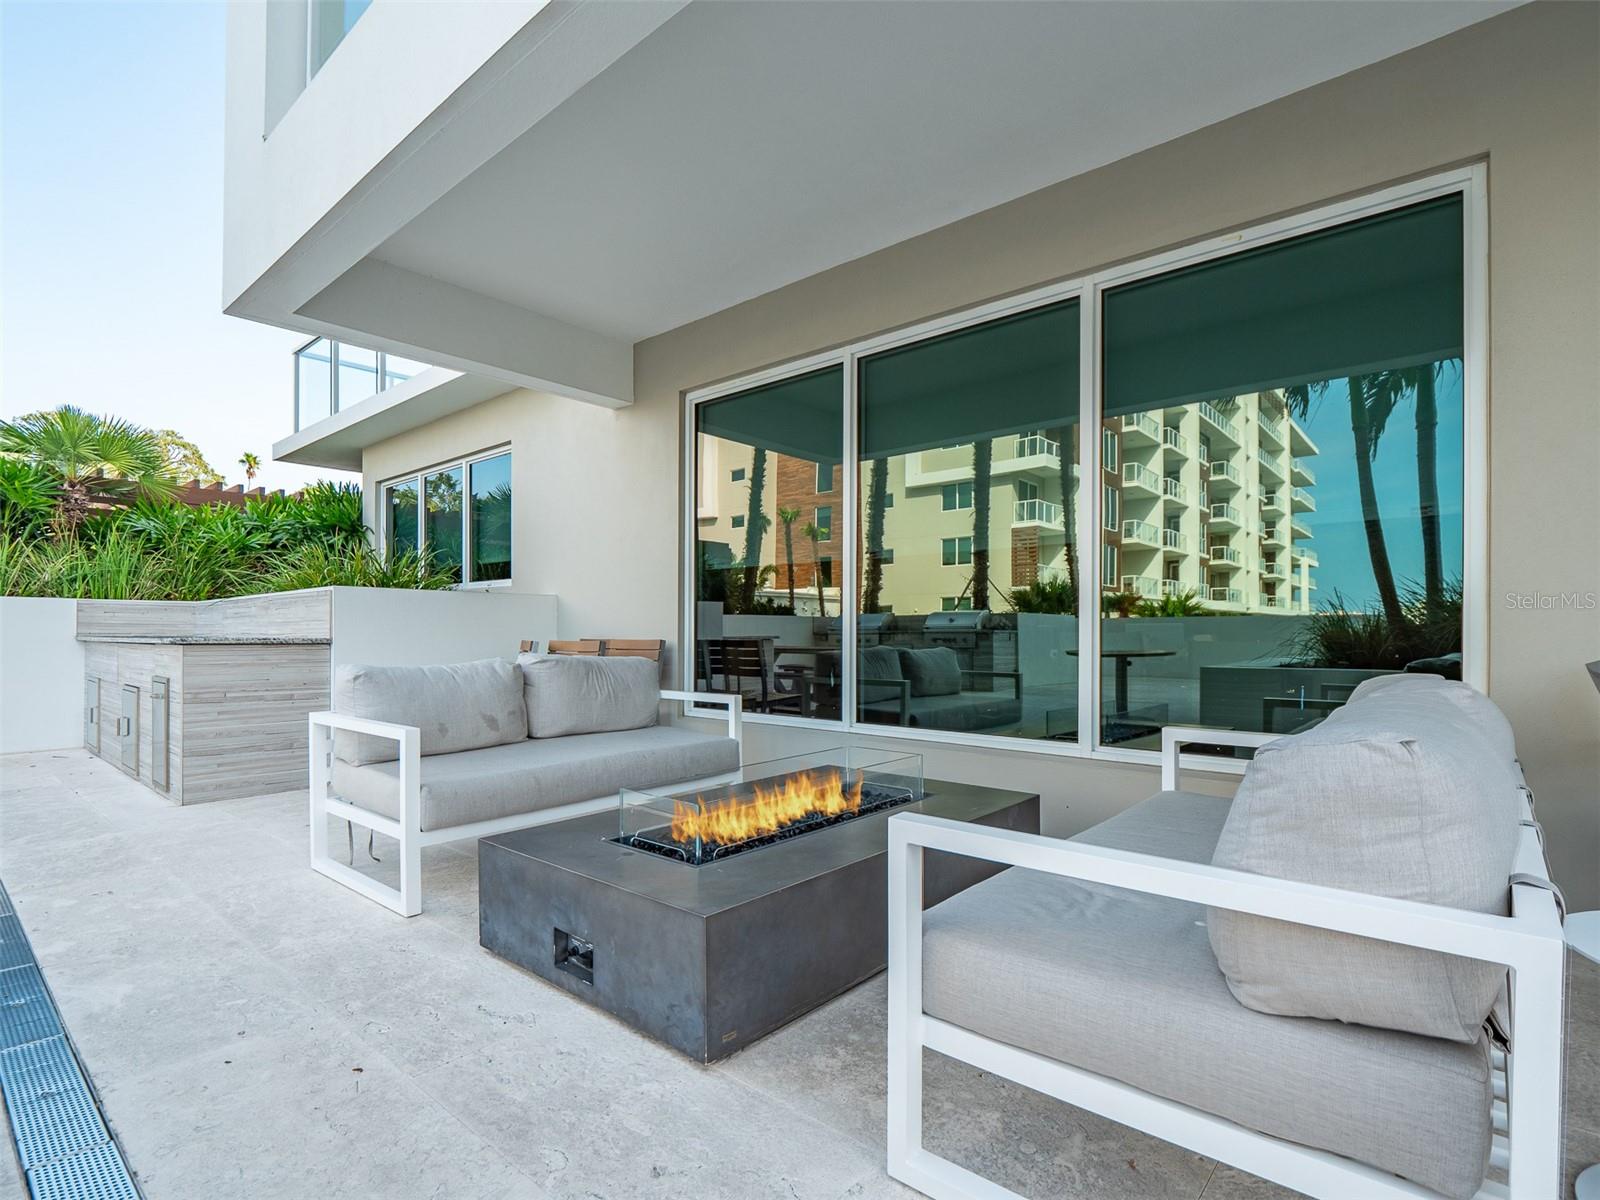 Fire pit at the outdoor poolside lounge